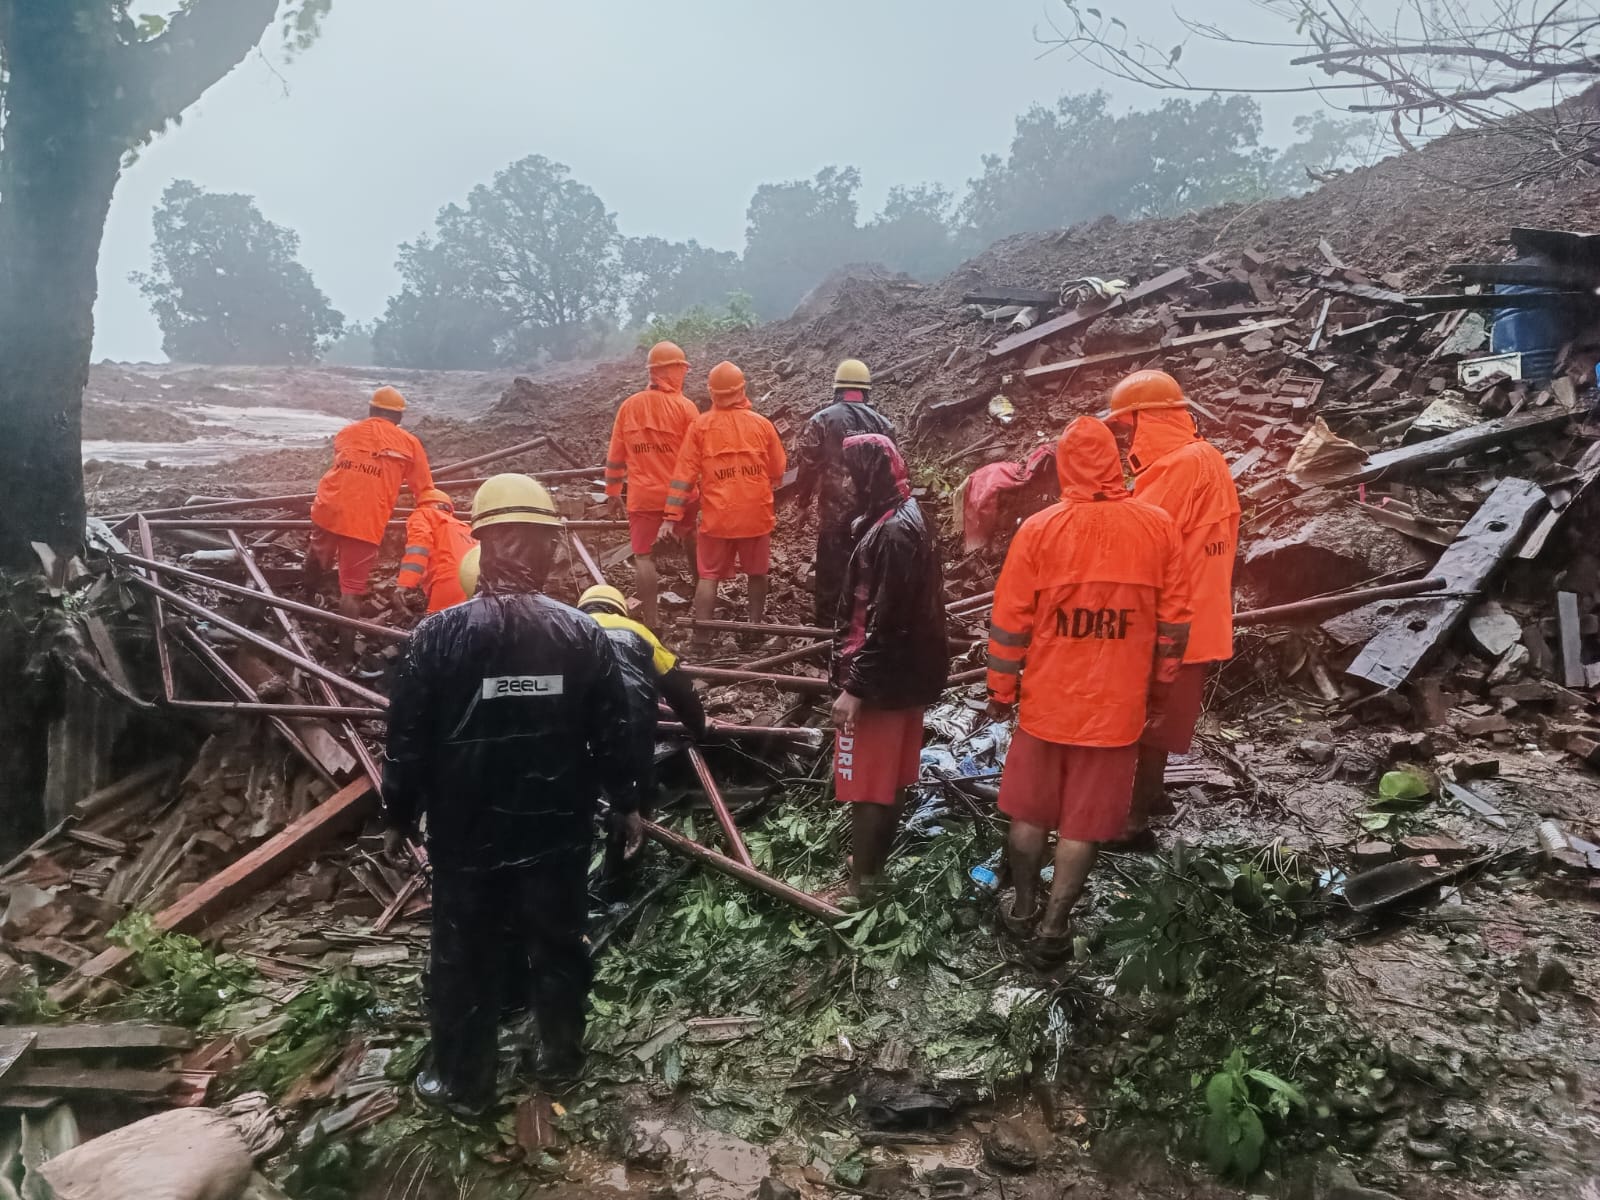 The village has around 50 houses, of which 17 were buried under the landslide, the official said. The landslide followed torrential rains in the area